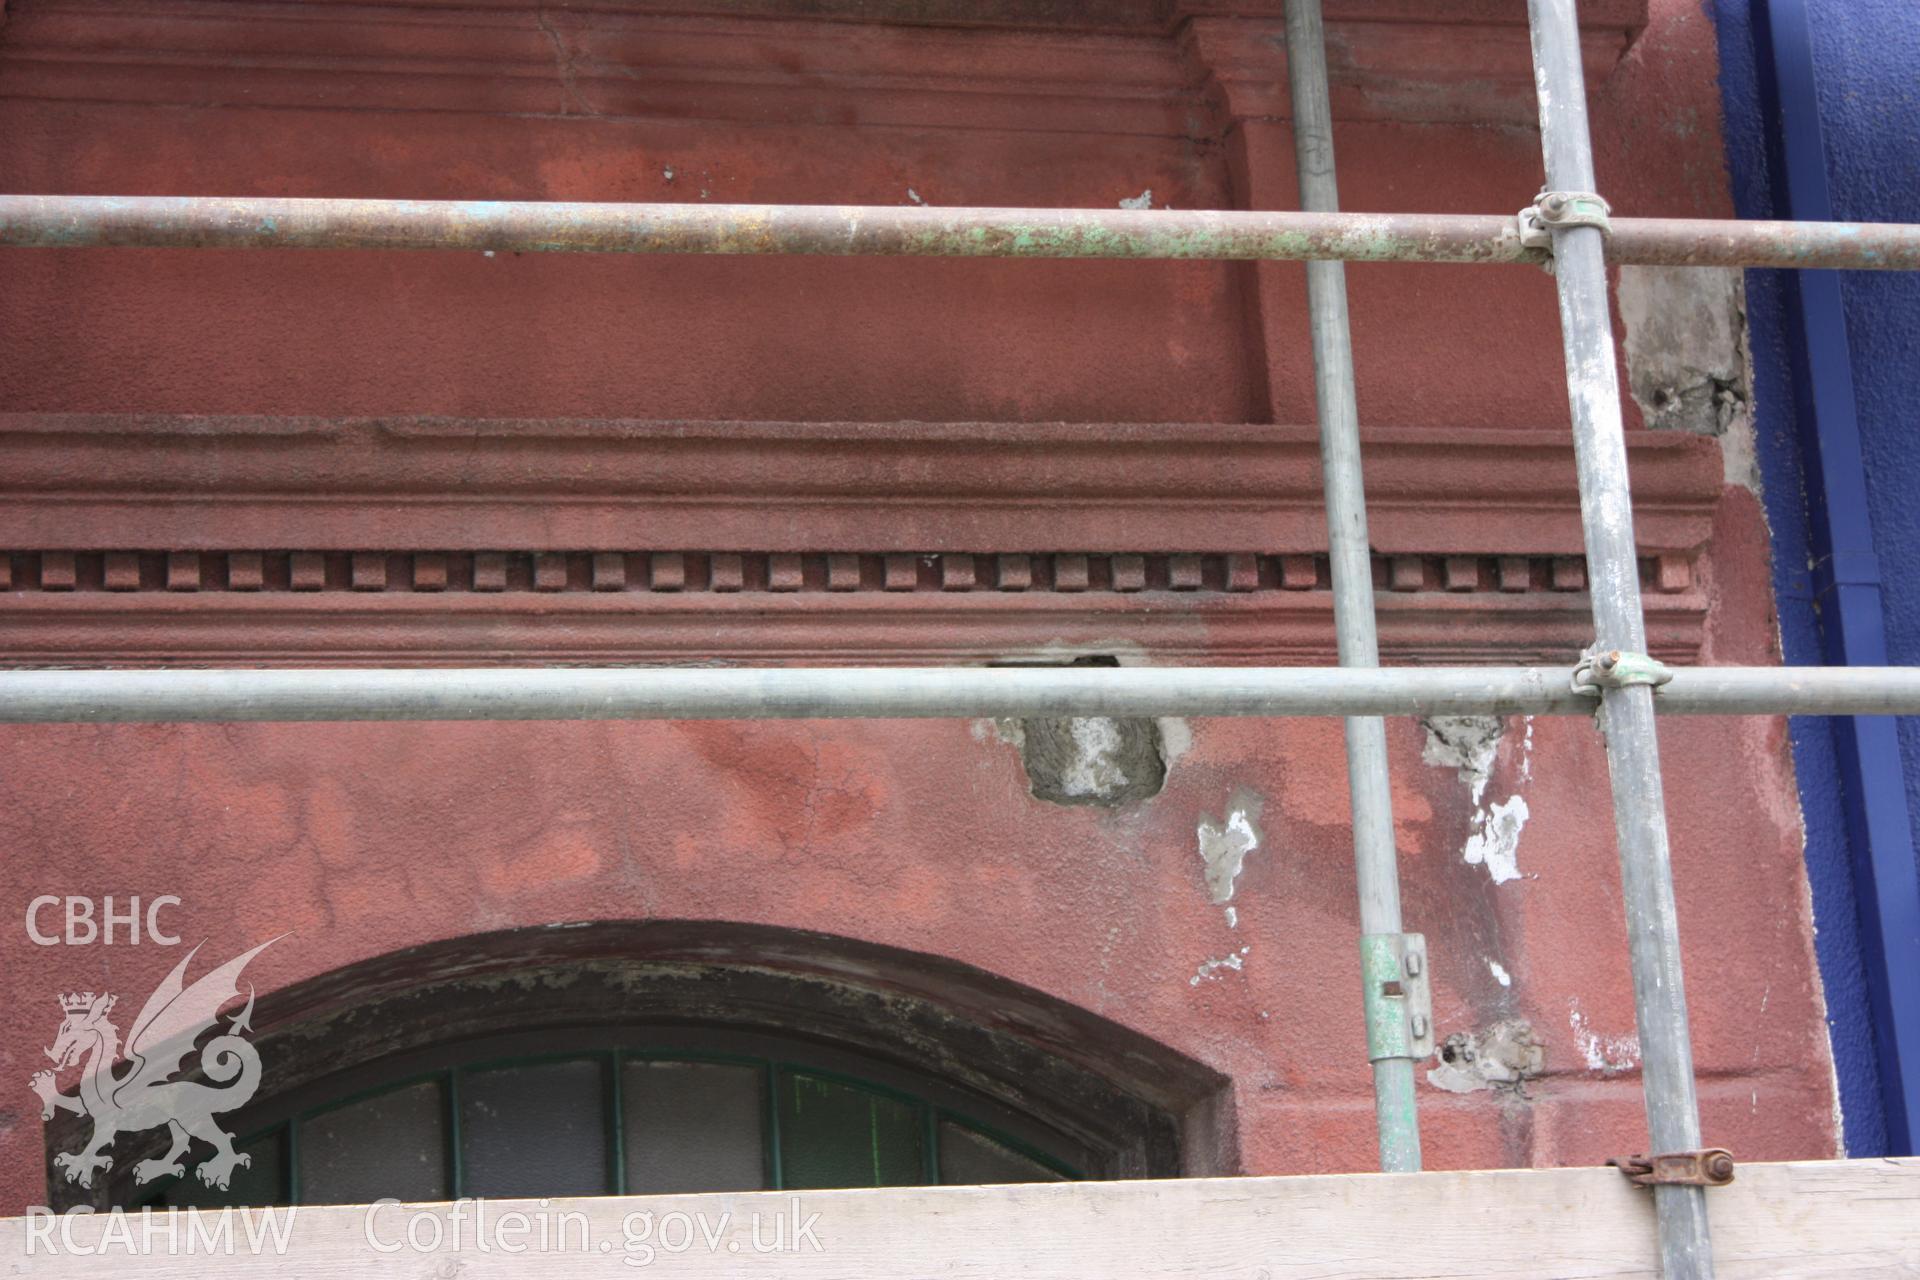 Colour photograph showing detail of exterior above ground floor door at the Old Auction Rooms/ Liberal Club in Aberystwyth. Photographic survey conducted by Geoff Ward on 9th June 2010 during repair work prior to conversion into flats.